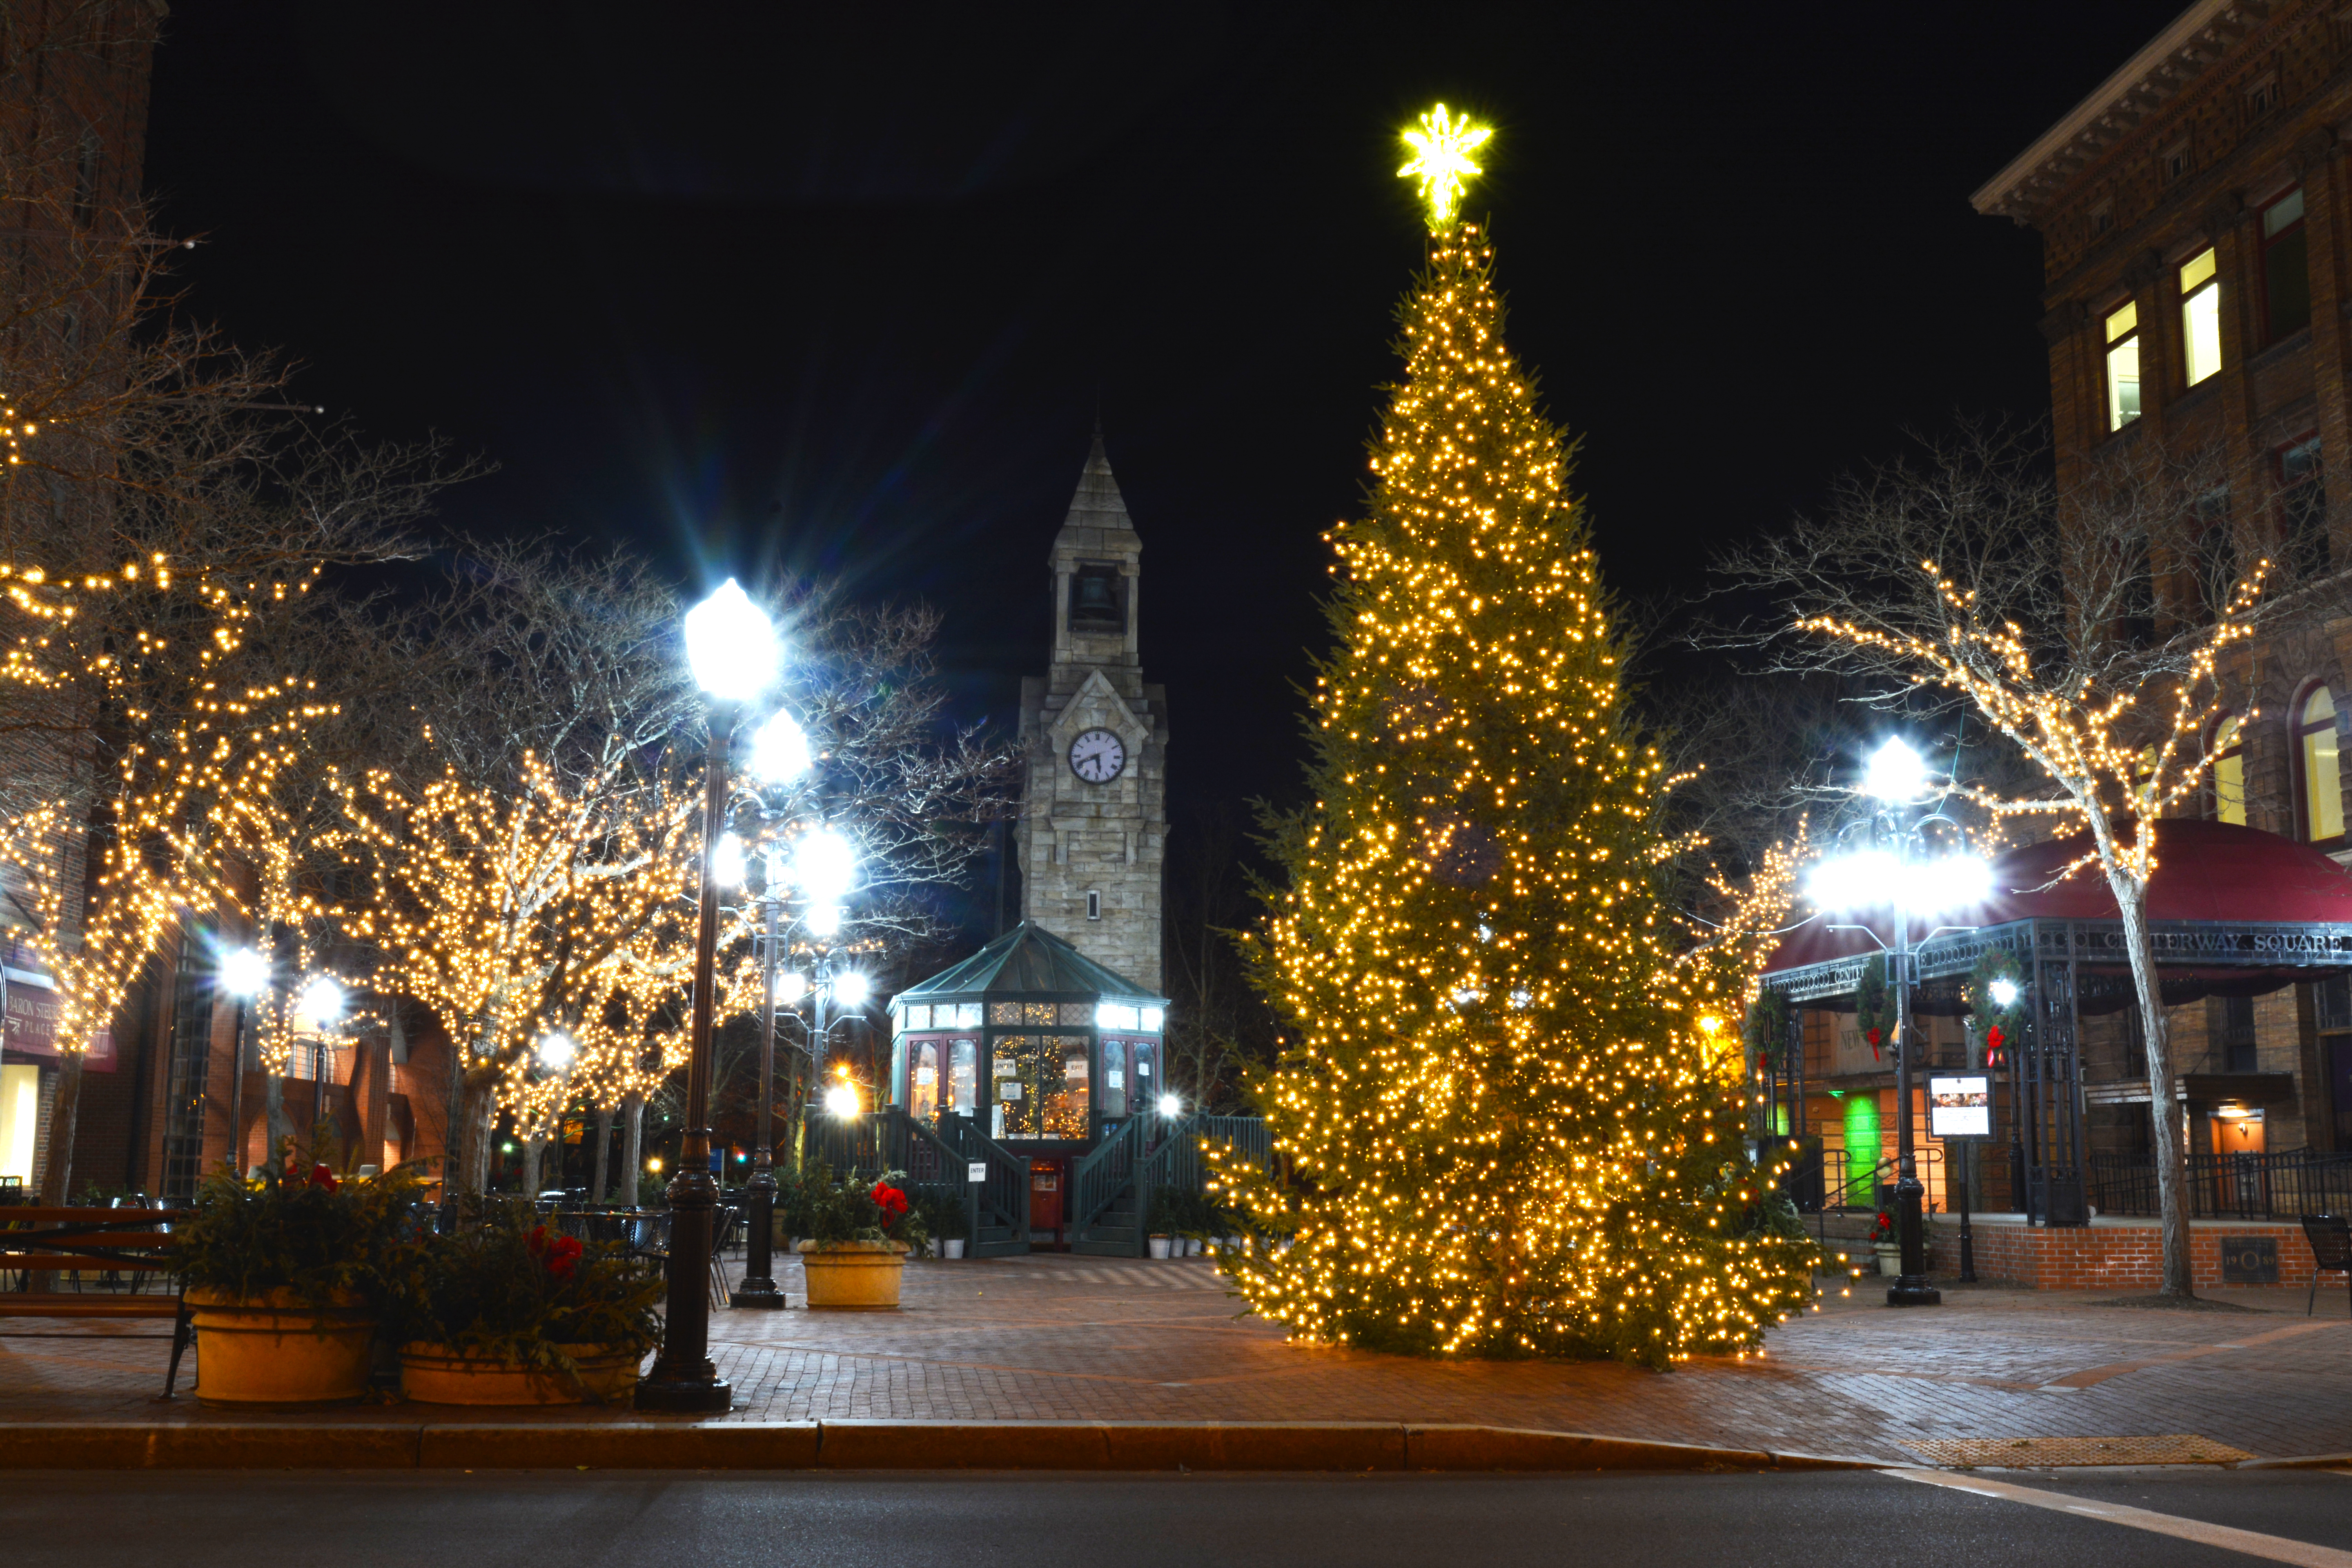 Urban Corning’s Guide to Crystal City Christmas